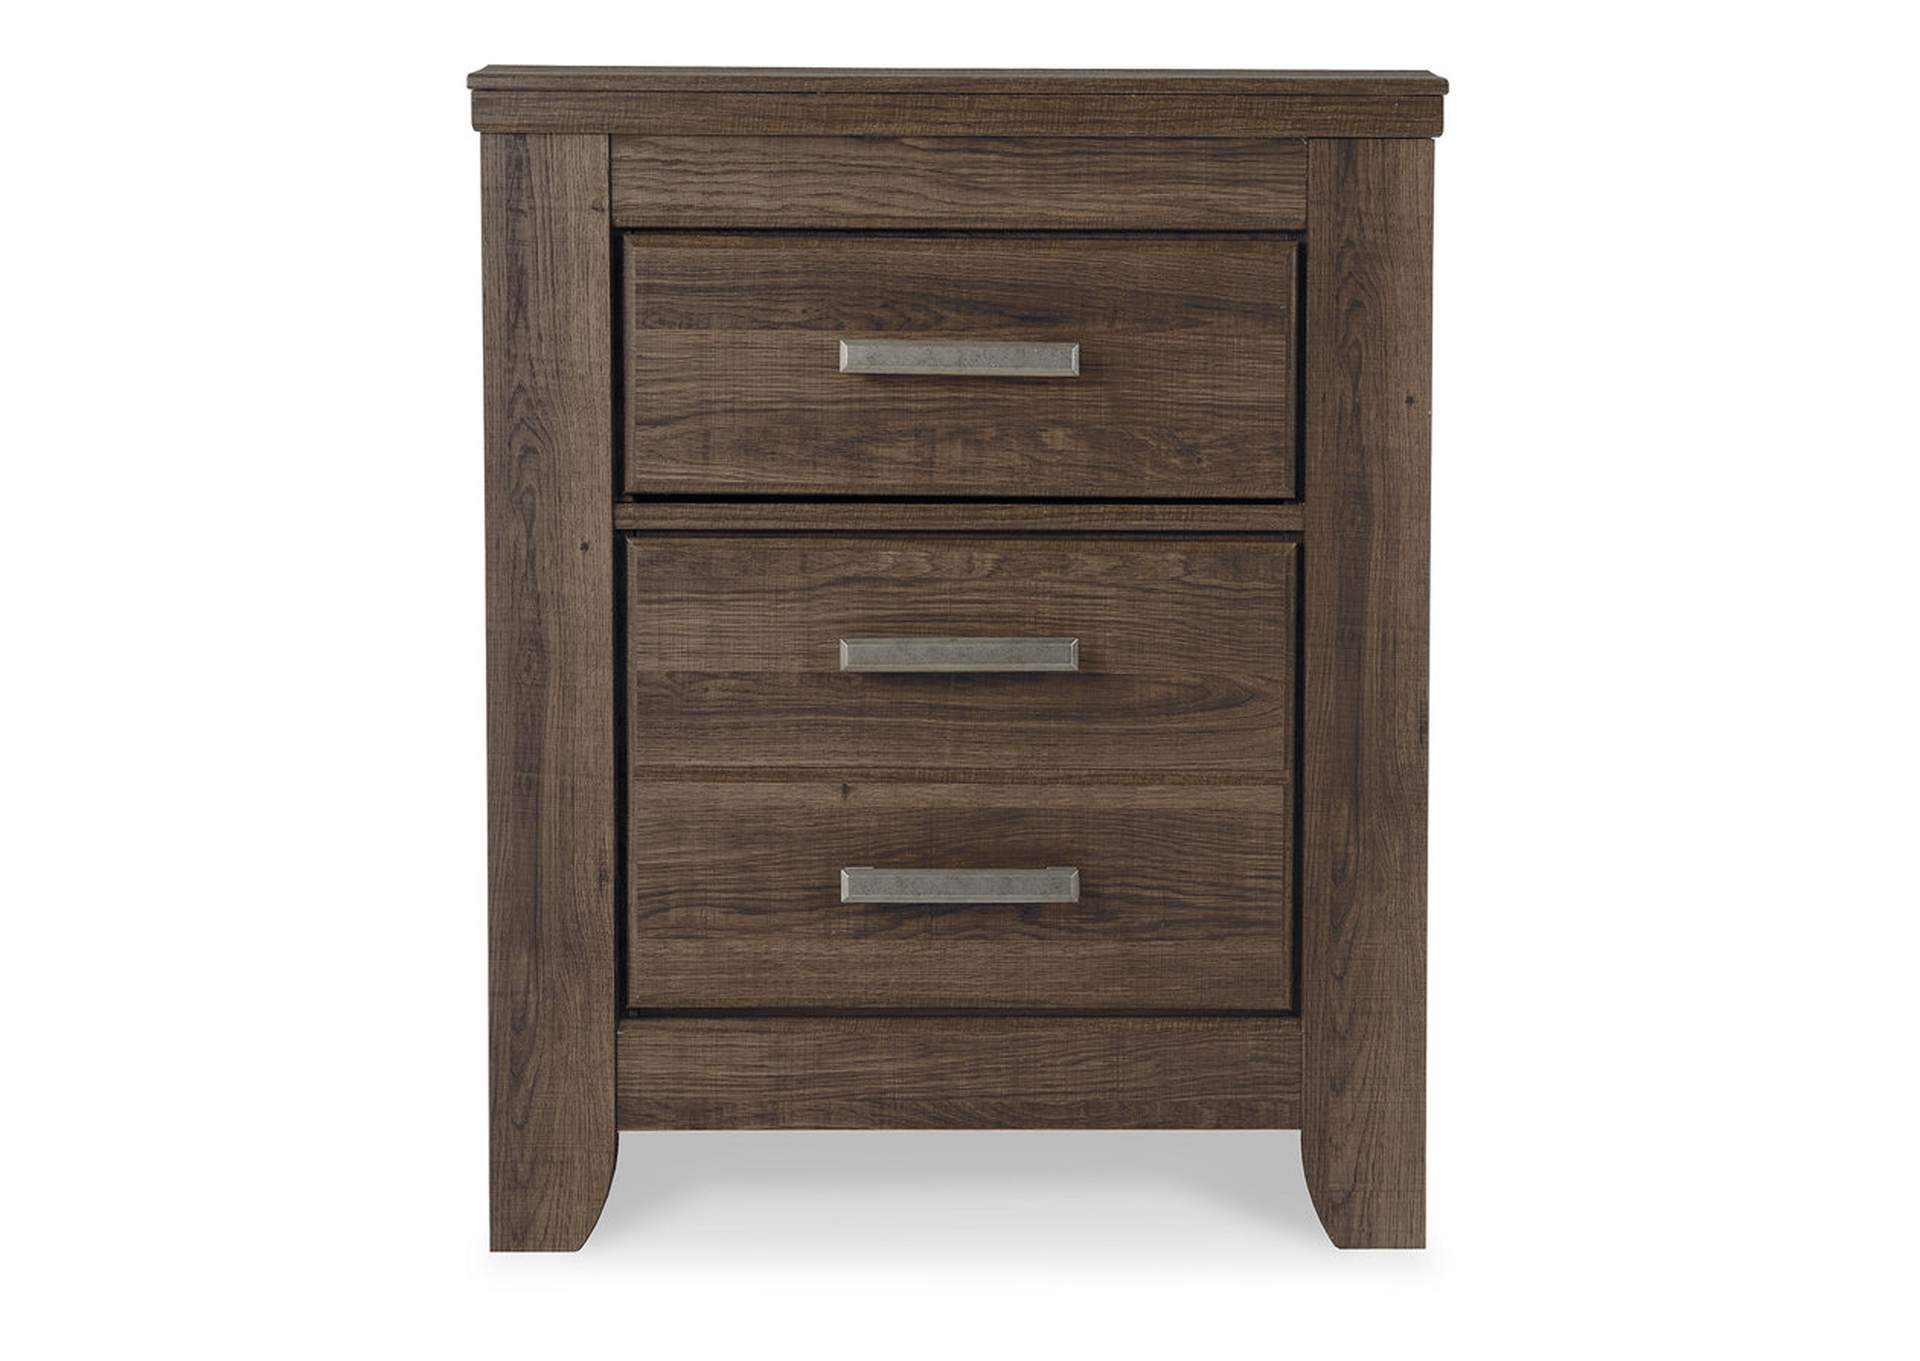 Juararo King Poster Bed, Dresser, Mirror, Chest and Nightstand,Signature Design By Ashley